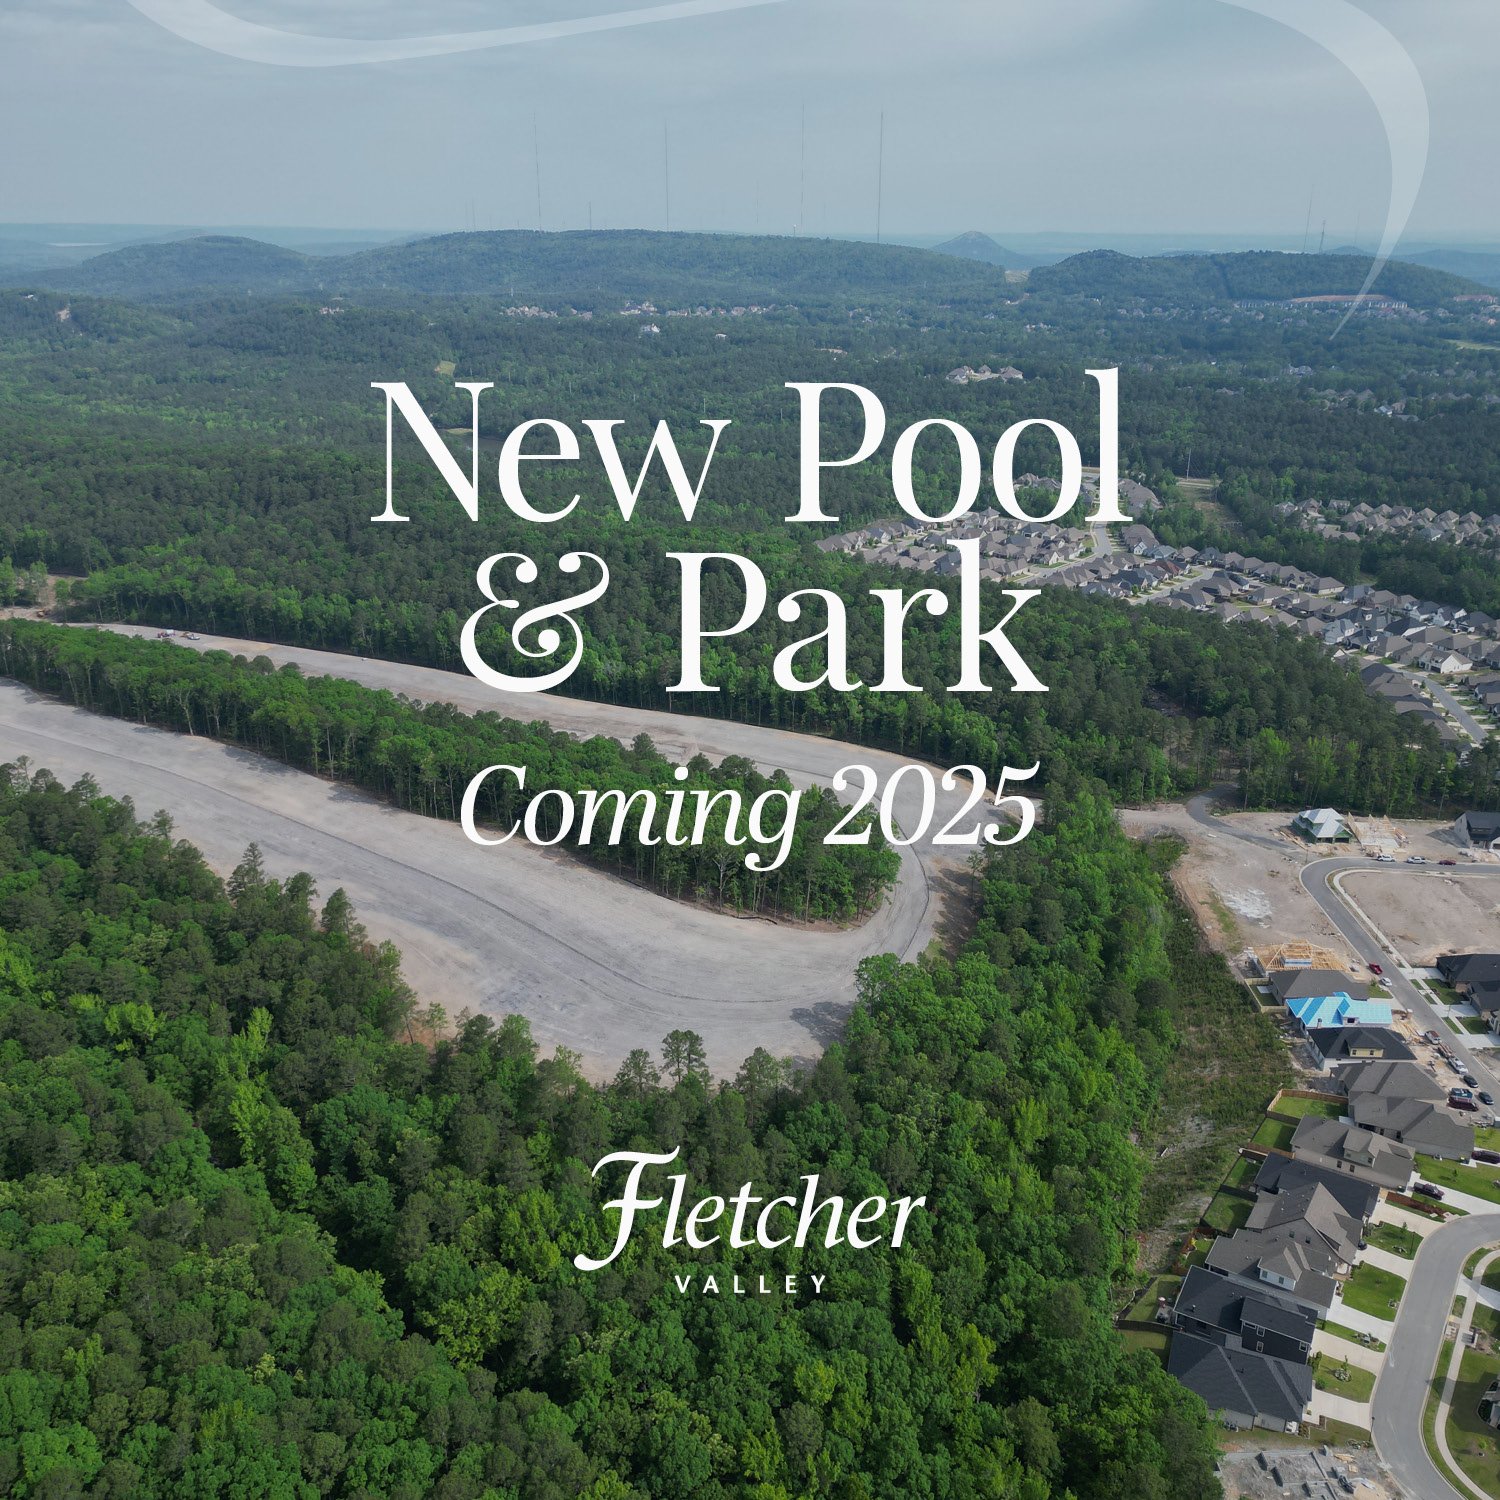 Exciting news for Fletcher Ridge! We just kicked off the planning process to build a new park and pool for this vibrant, connected community. Stay tuned for updates in the coming months! (Looking for a dream home that's big on quality, convenience an